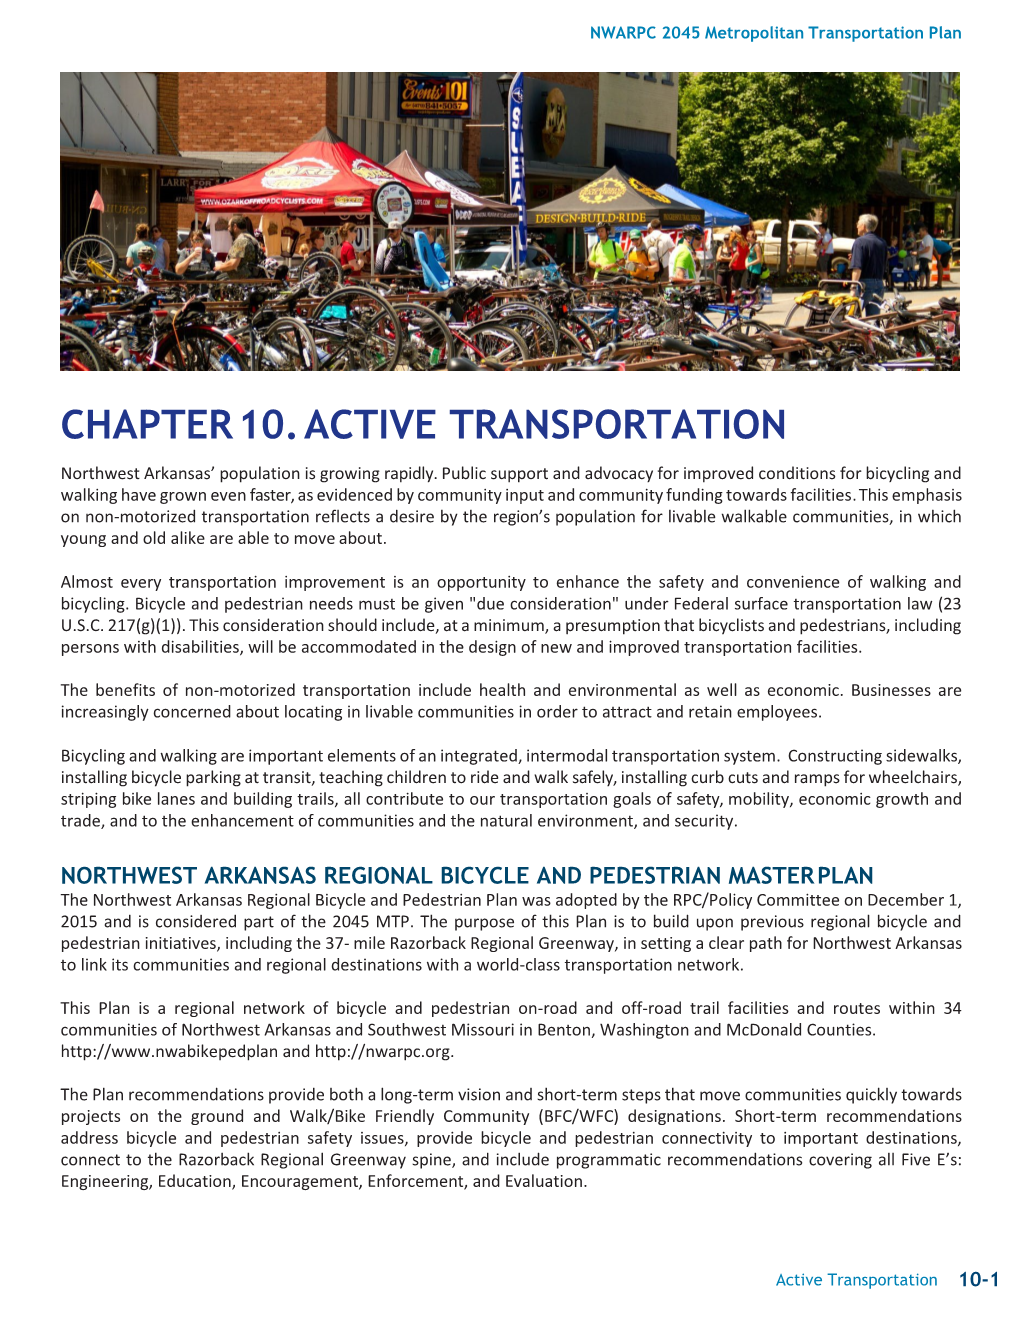 CHAPTER 10. ACTIVE TRANSPORTATION Northwest Arkansas’ Population Is Growing Rapidly